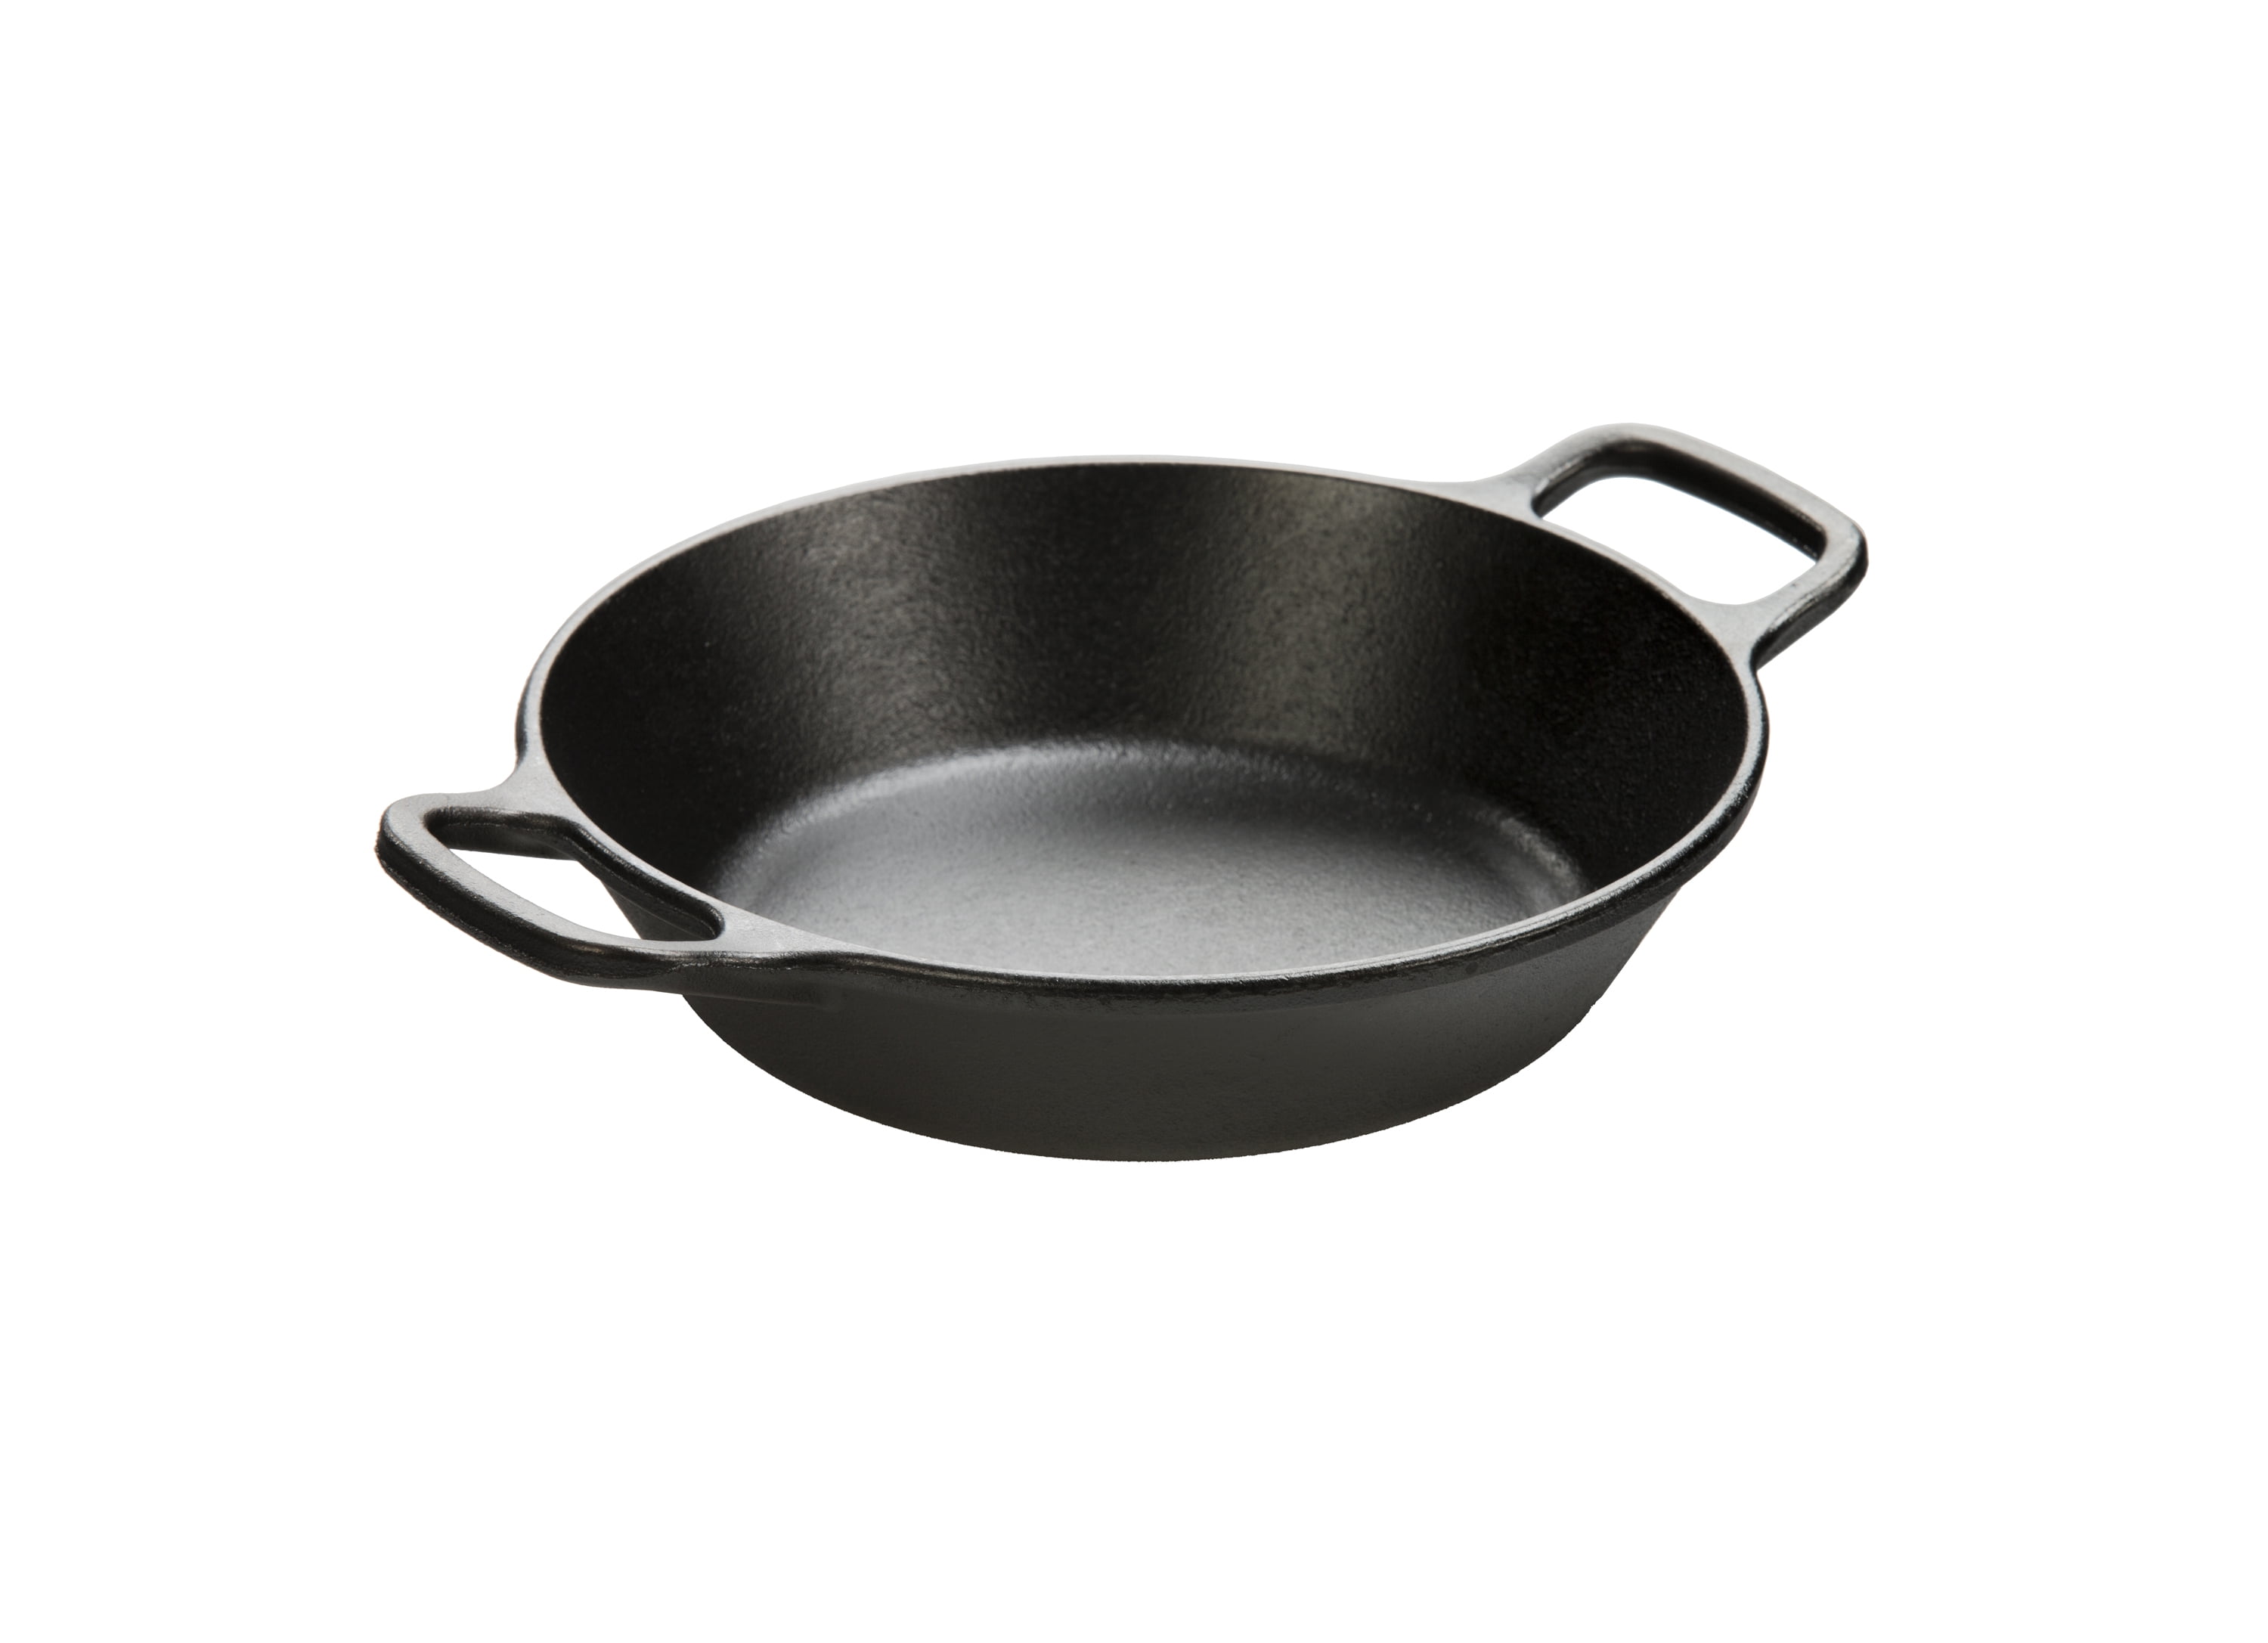 LEGEND COOKWARE | Cast Iron Skillet with Lid | Large 12” Frying Pan with  Glass Lid & Silicone Handle for Oven, Induction, Cooking, Pizza, Sautéing 